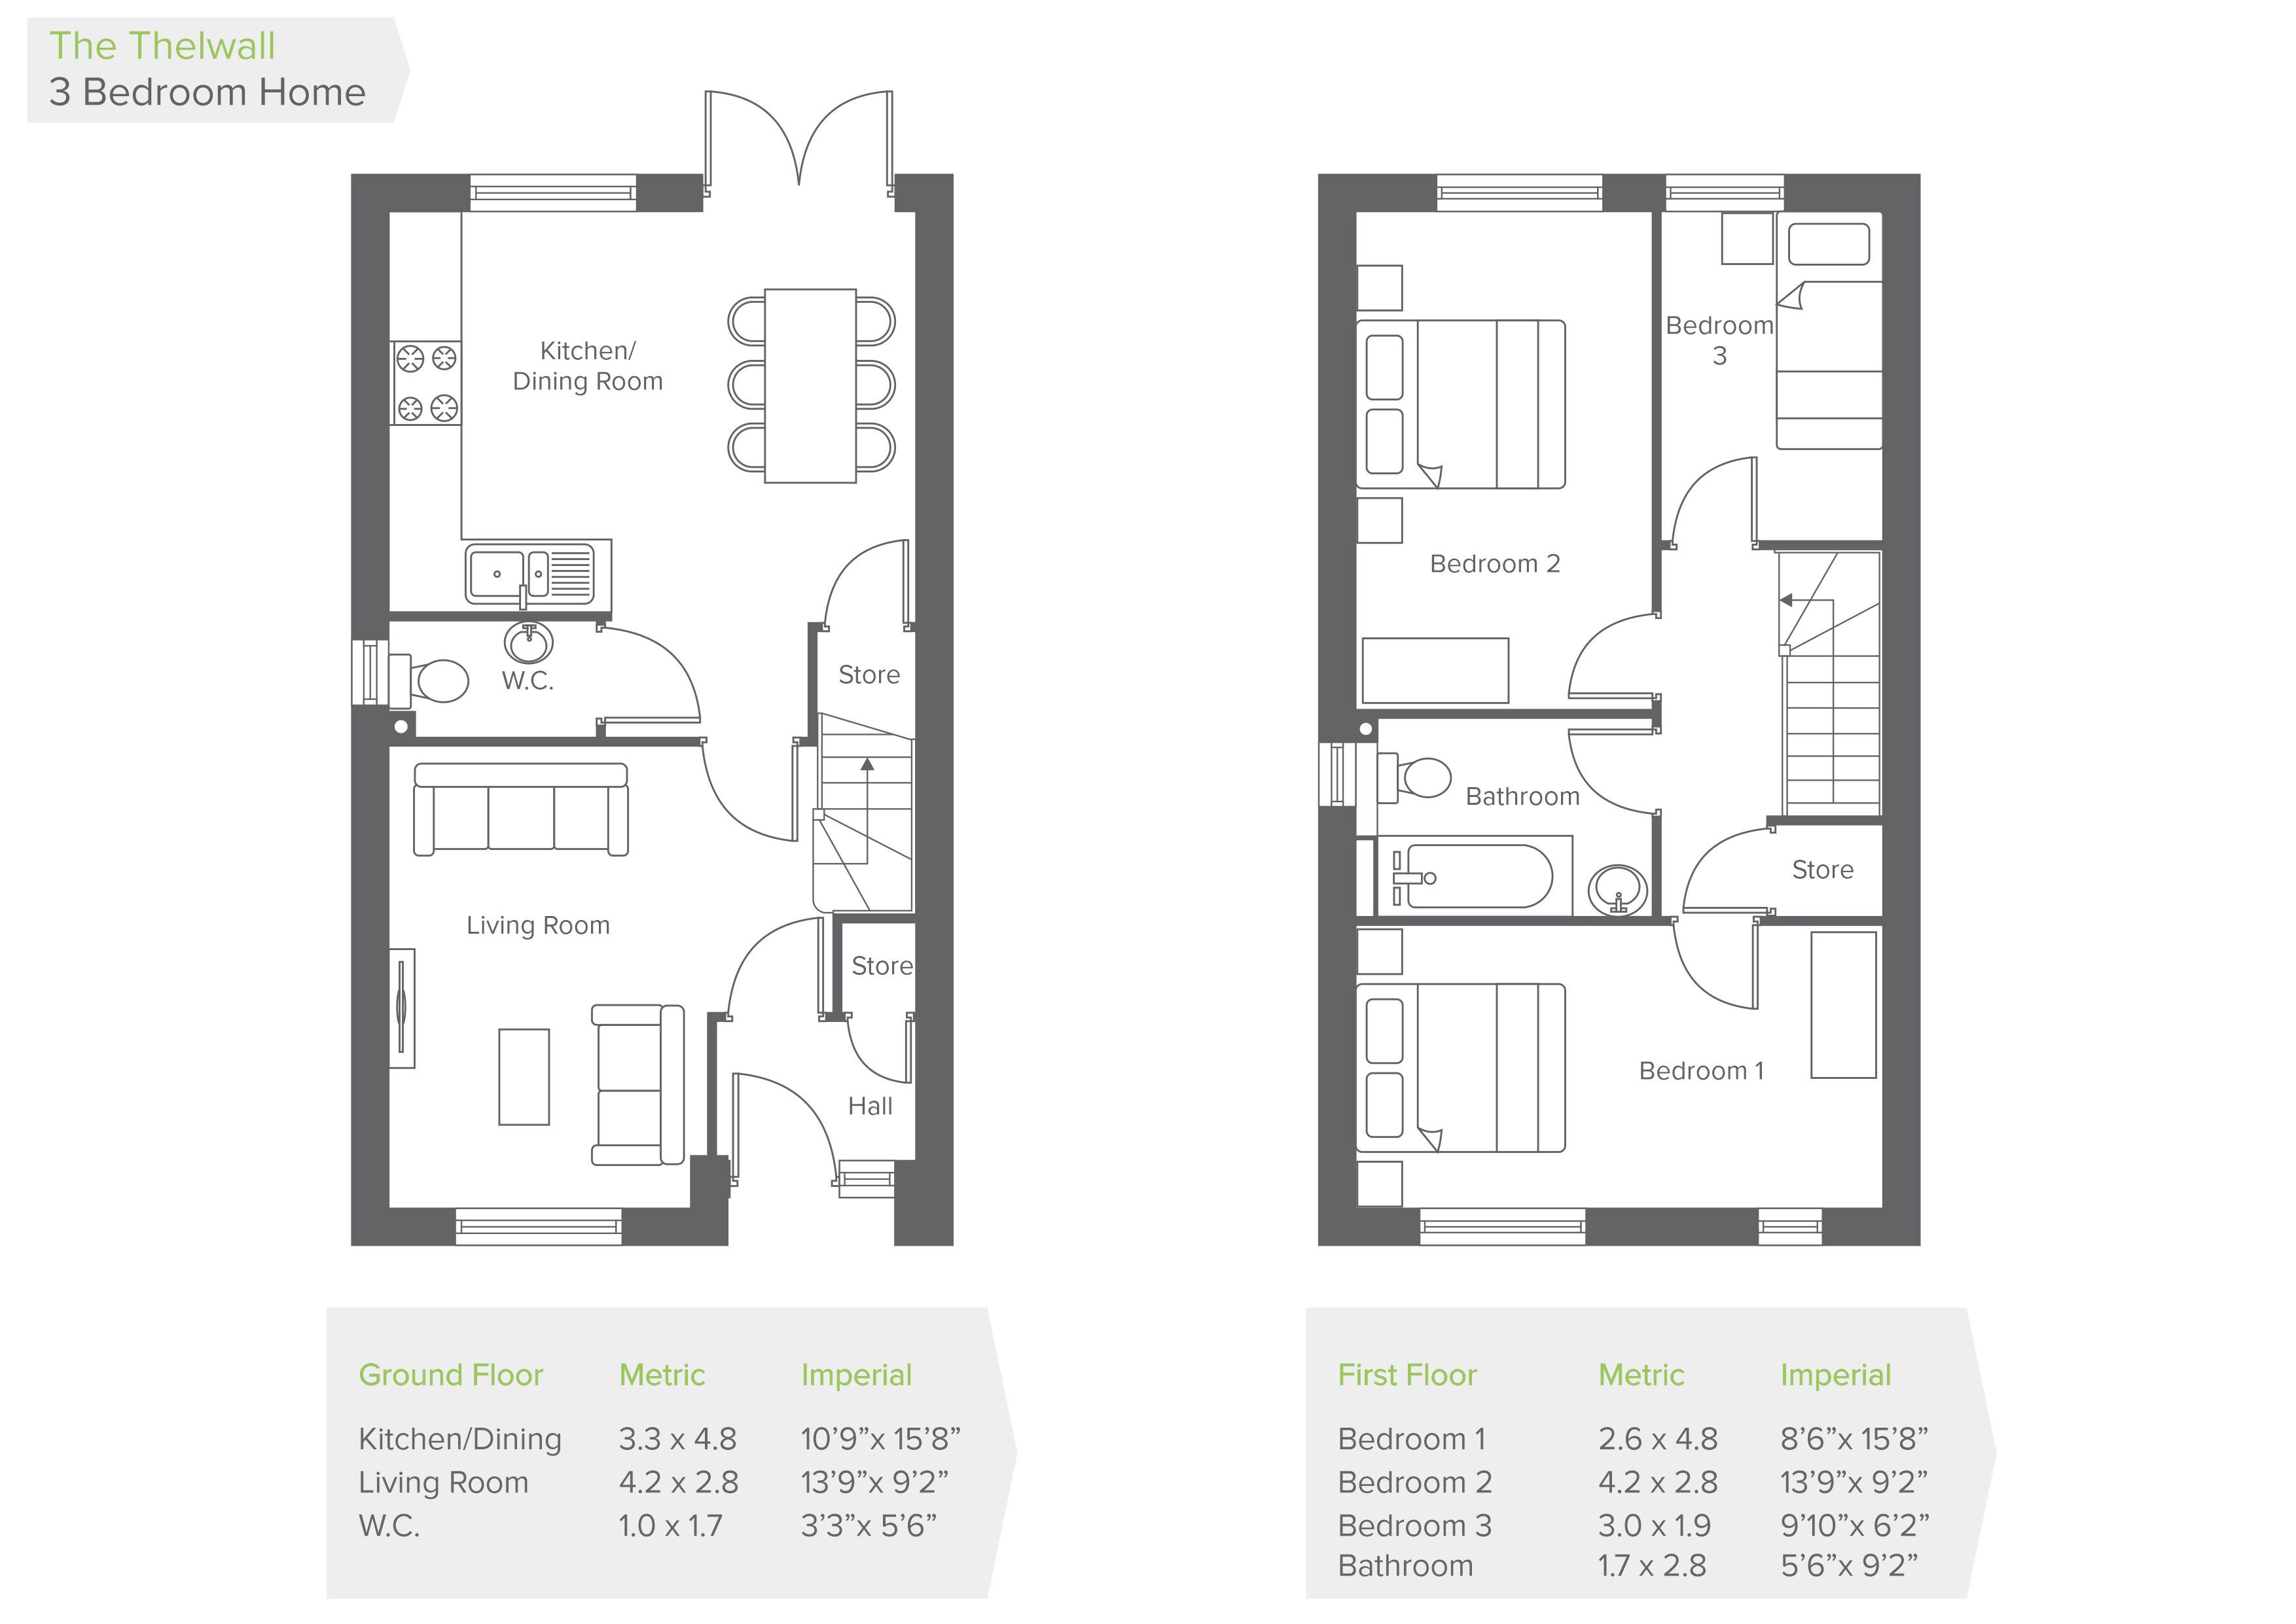 The Thelwall floor plan